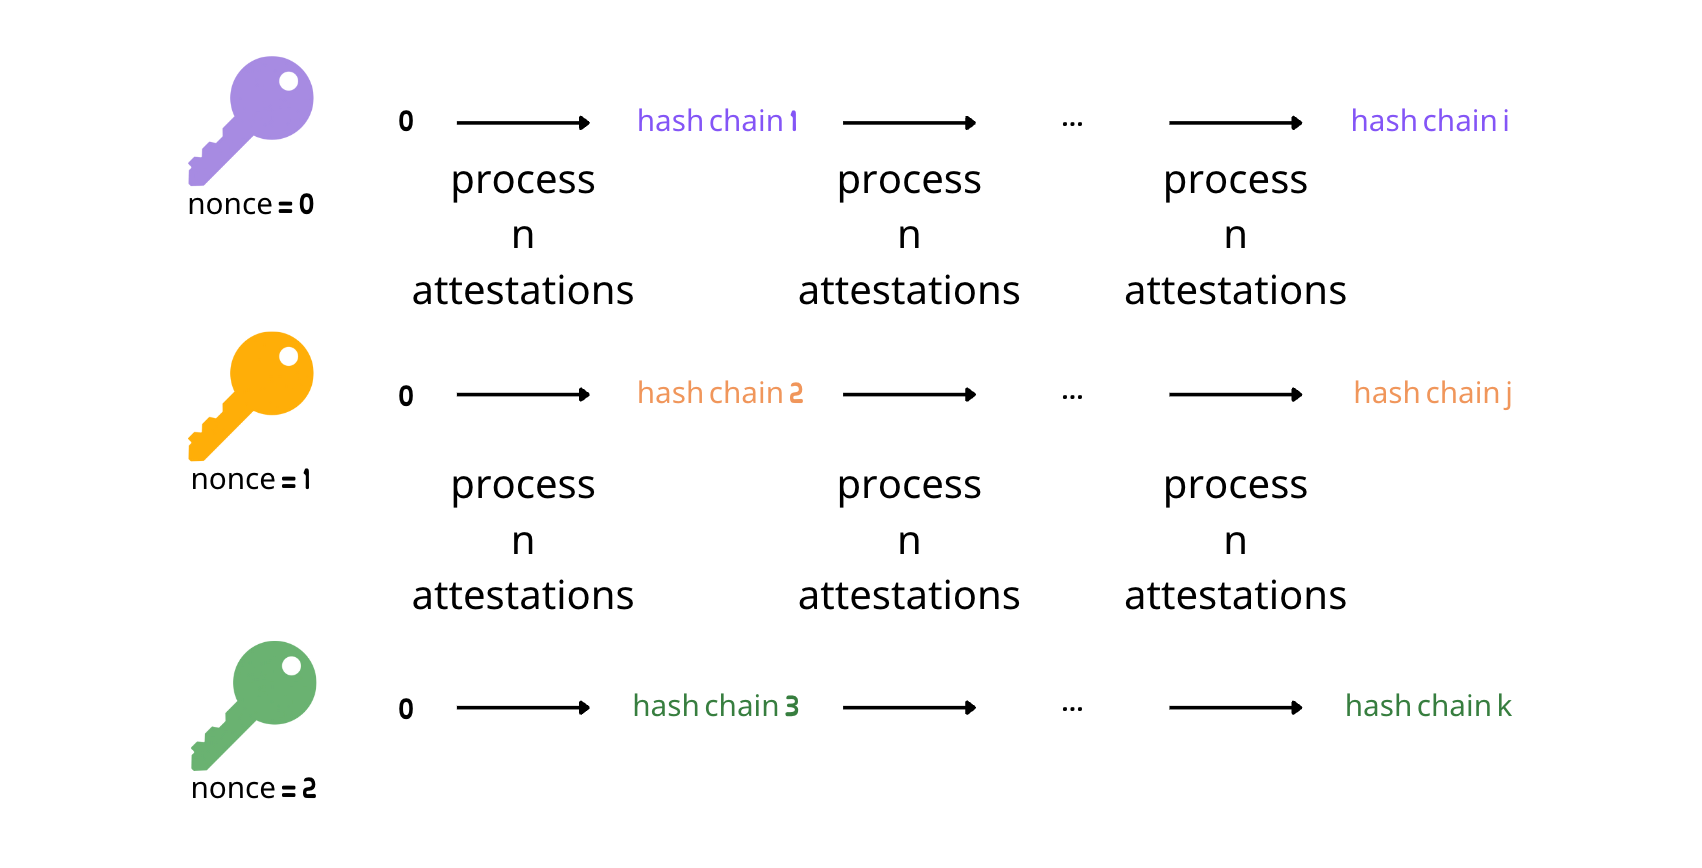 How hash chain is processed in process attestations proofs.